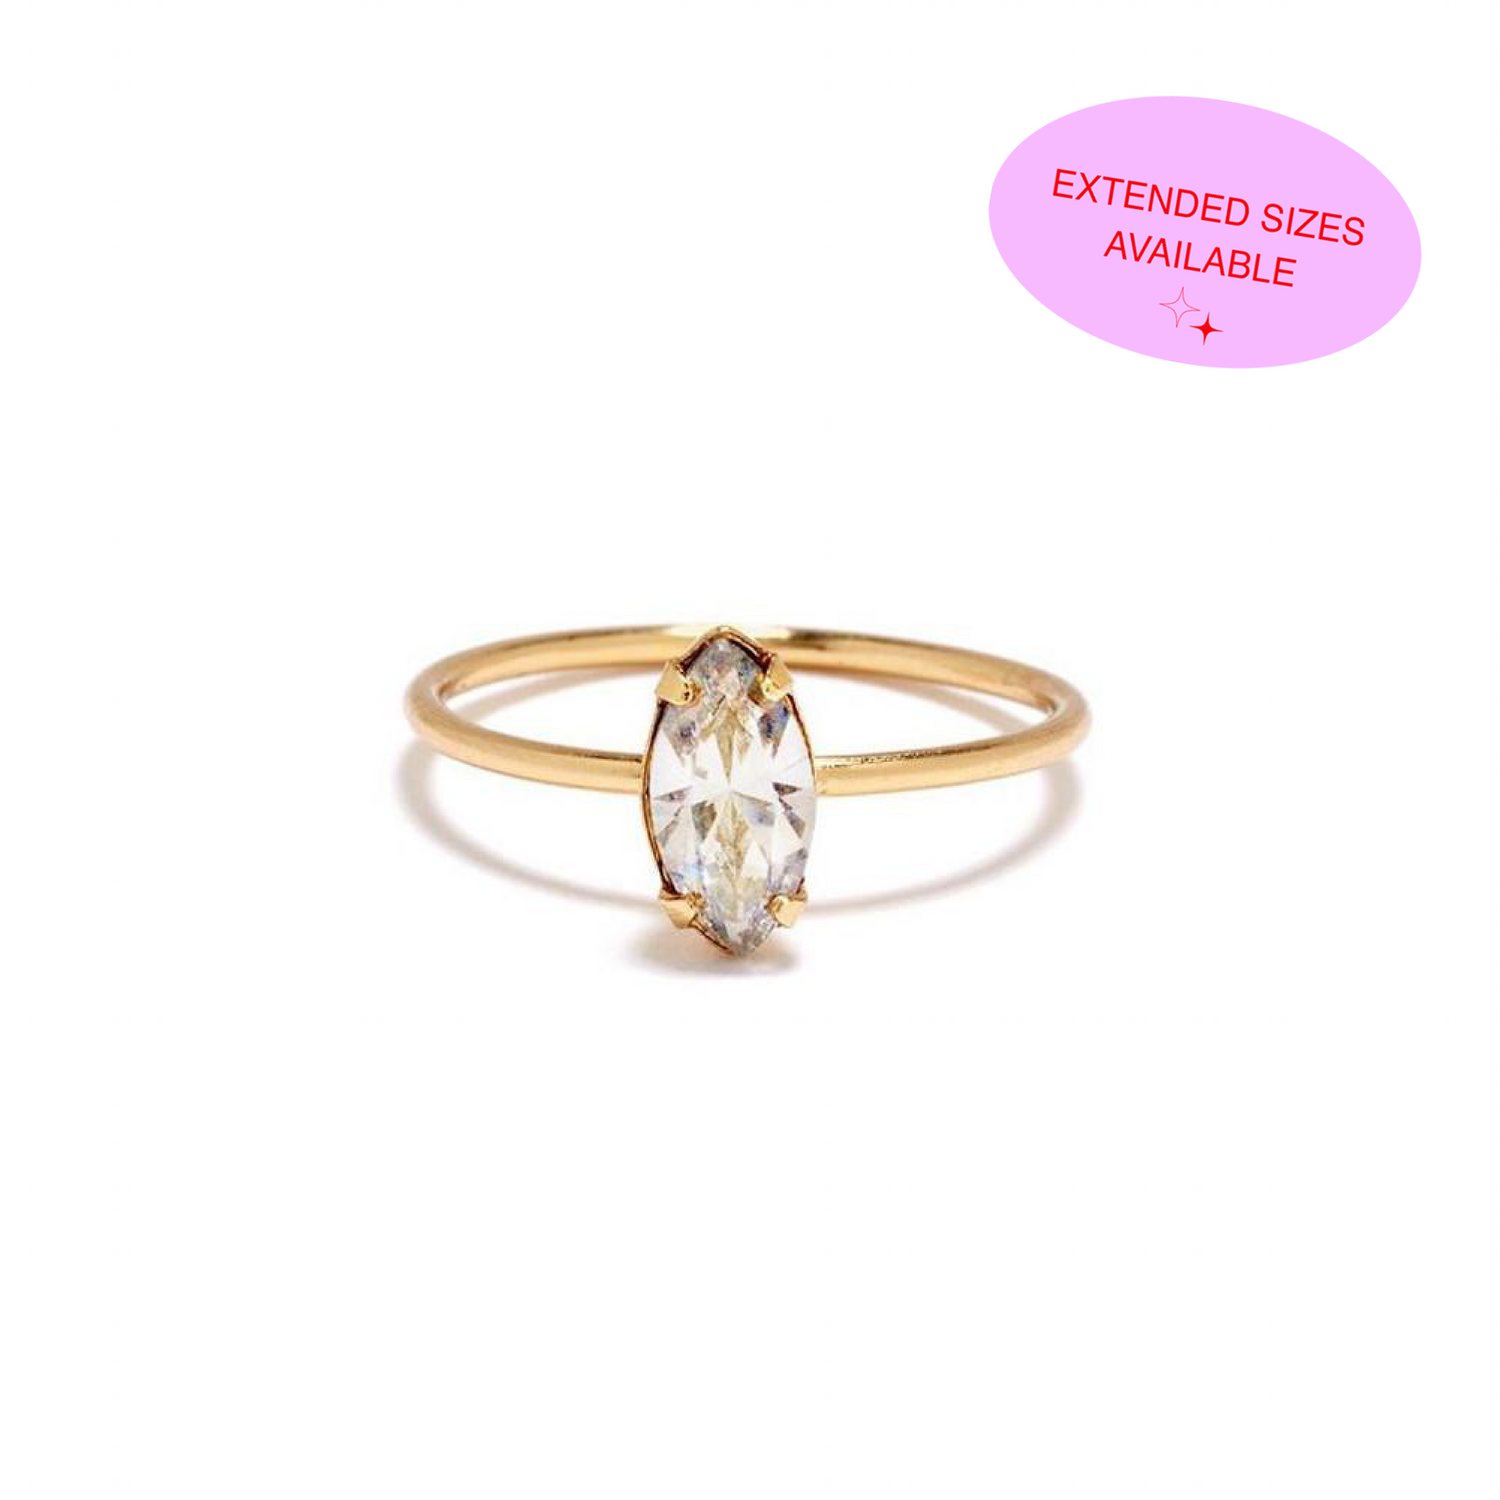 Vermeil Ring, Gold ring,Crystal Ring, Swarovski Crystal Ring, Vintage Crystal Ring - Size 7 Other Sizes Also Available